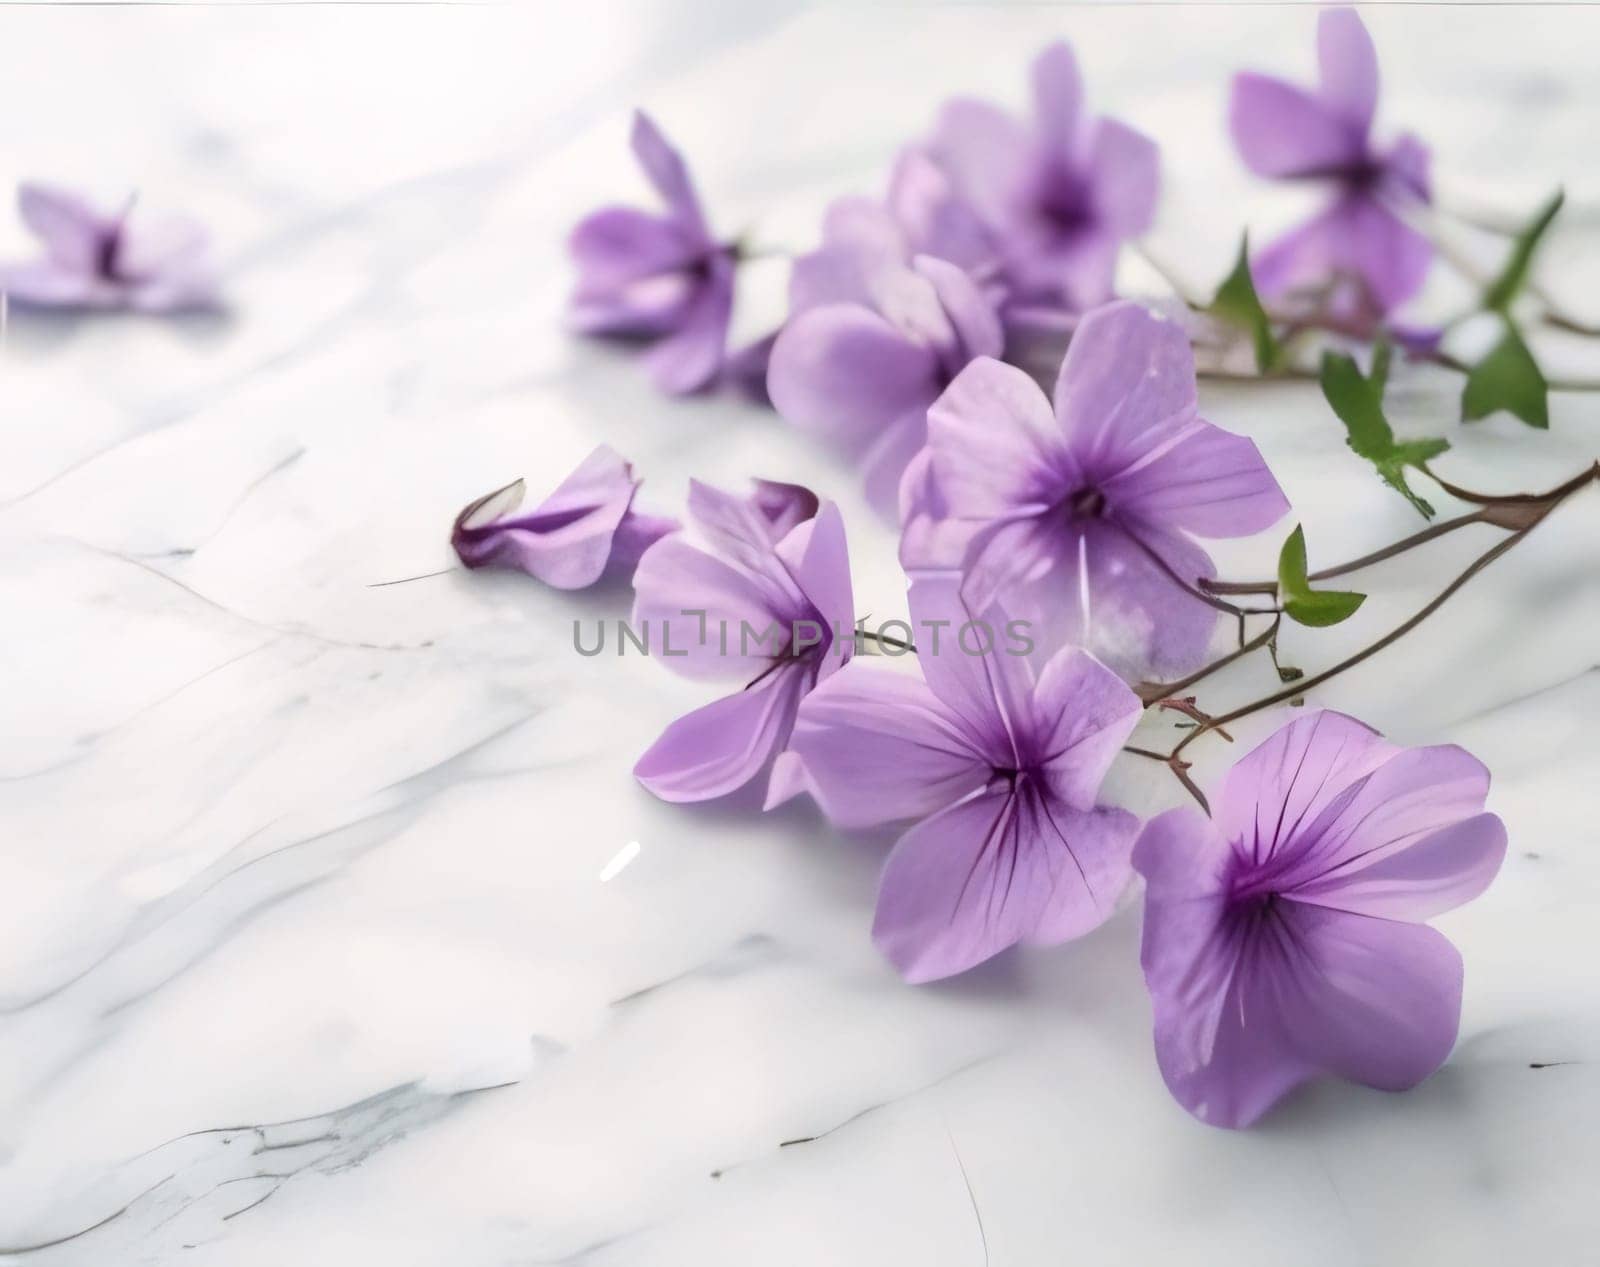 Purple flowers lying on a marble background. Flowering flowers, a symbol of spring, new life. A joyful time of nature awakening to life.